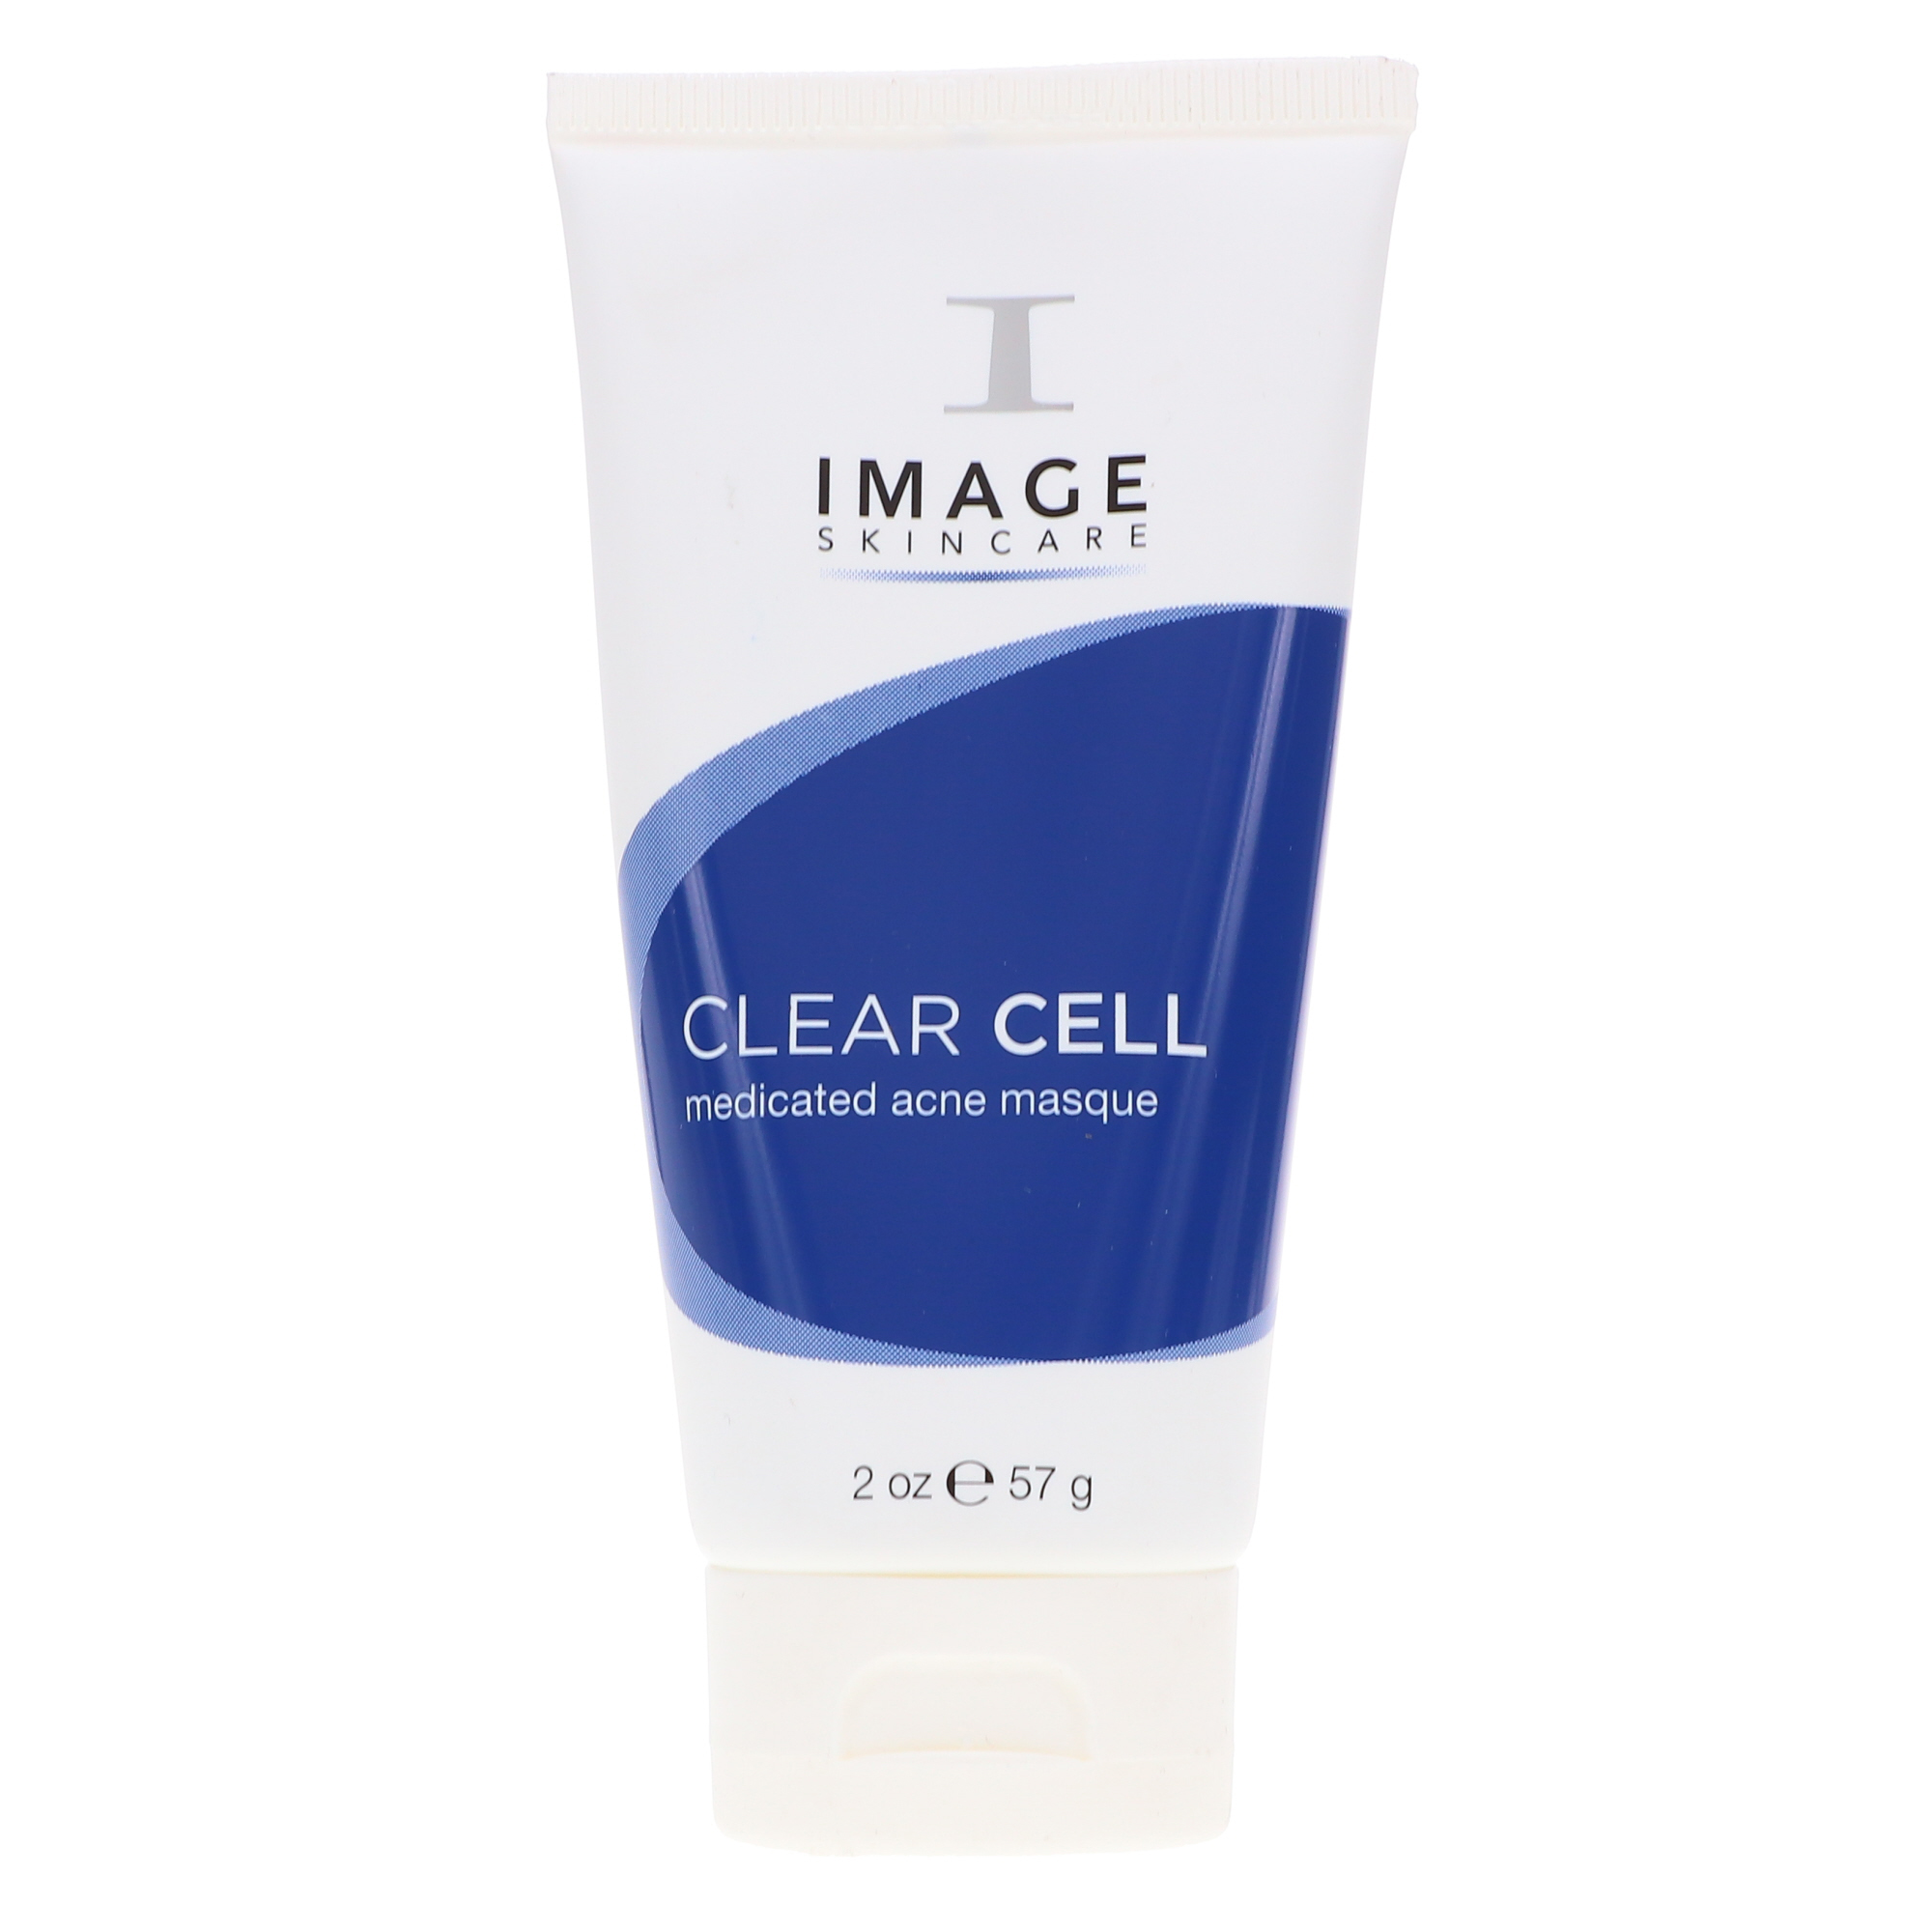 IMAGE Skincare Clear Cell Medicated Acne Masque 2 oz - image 1 of 8